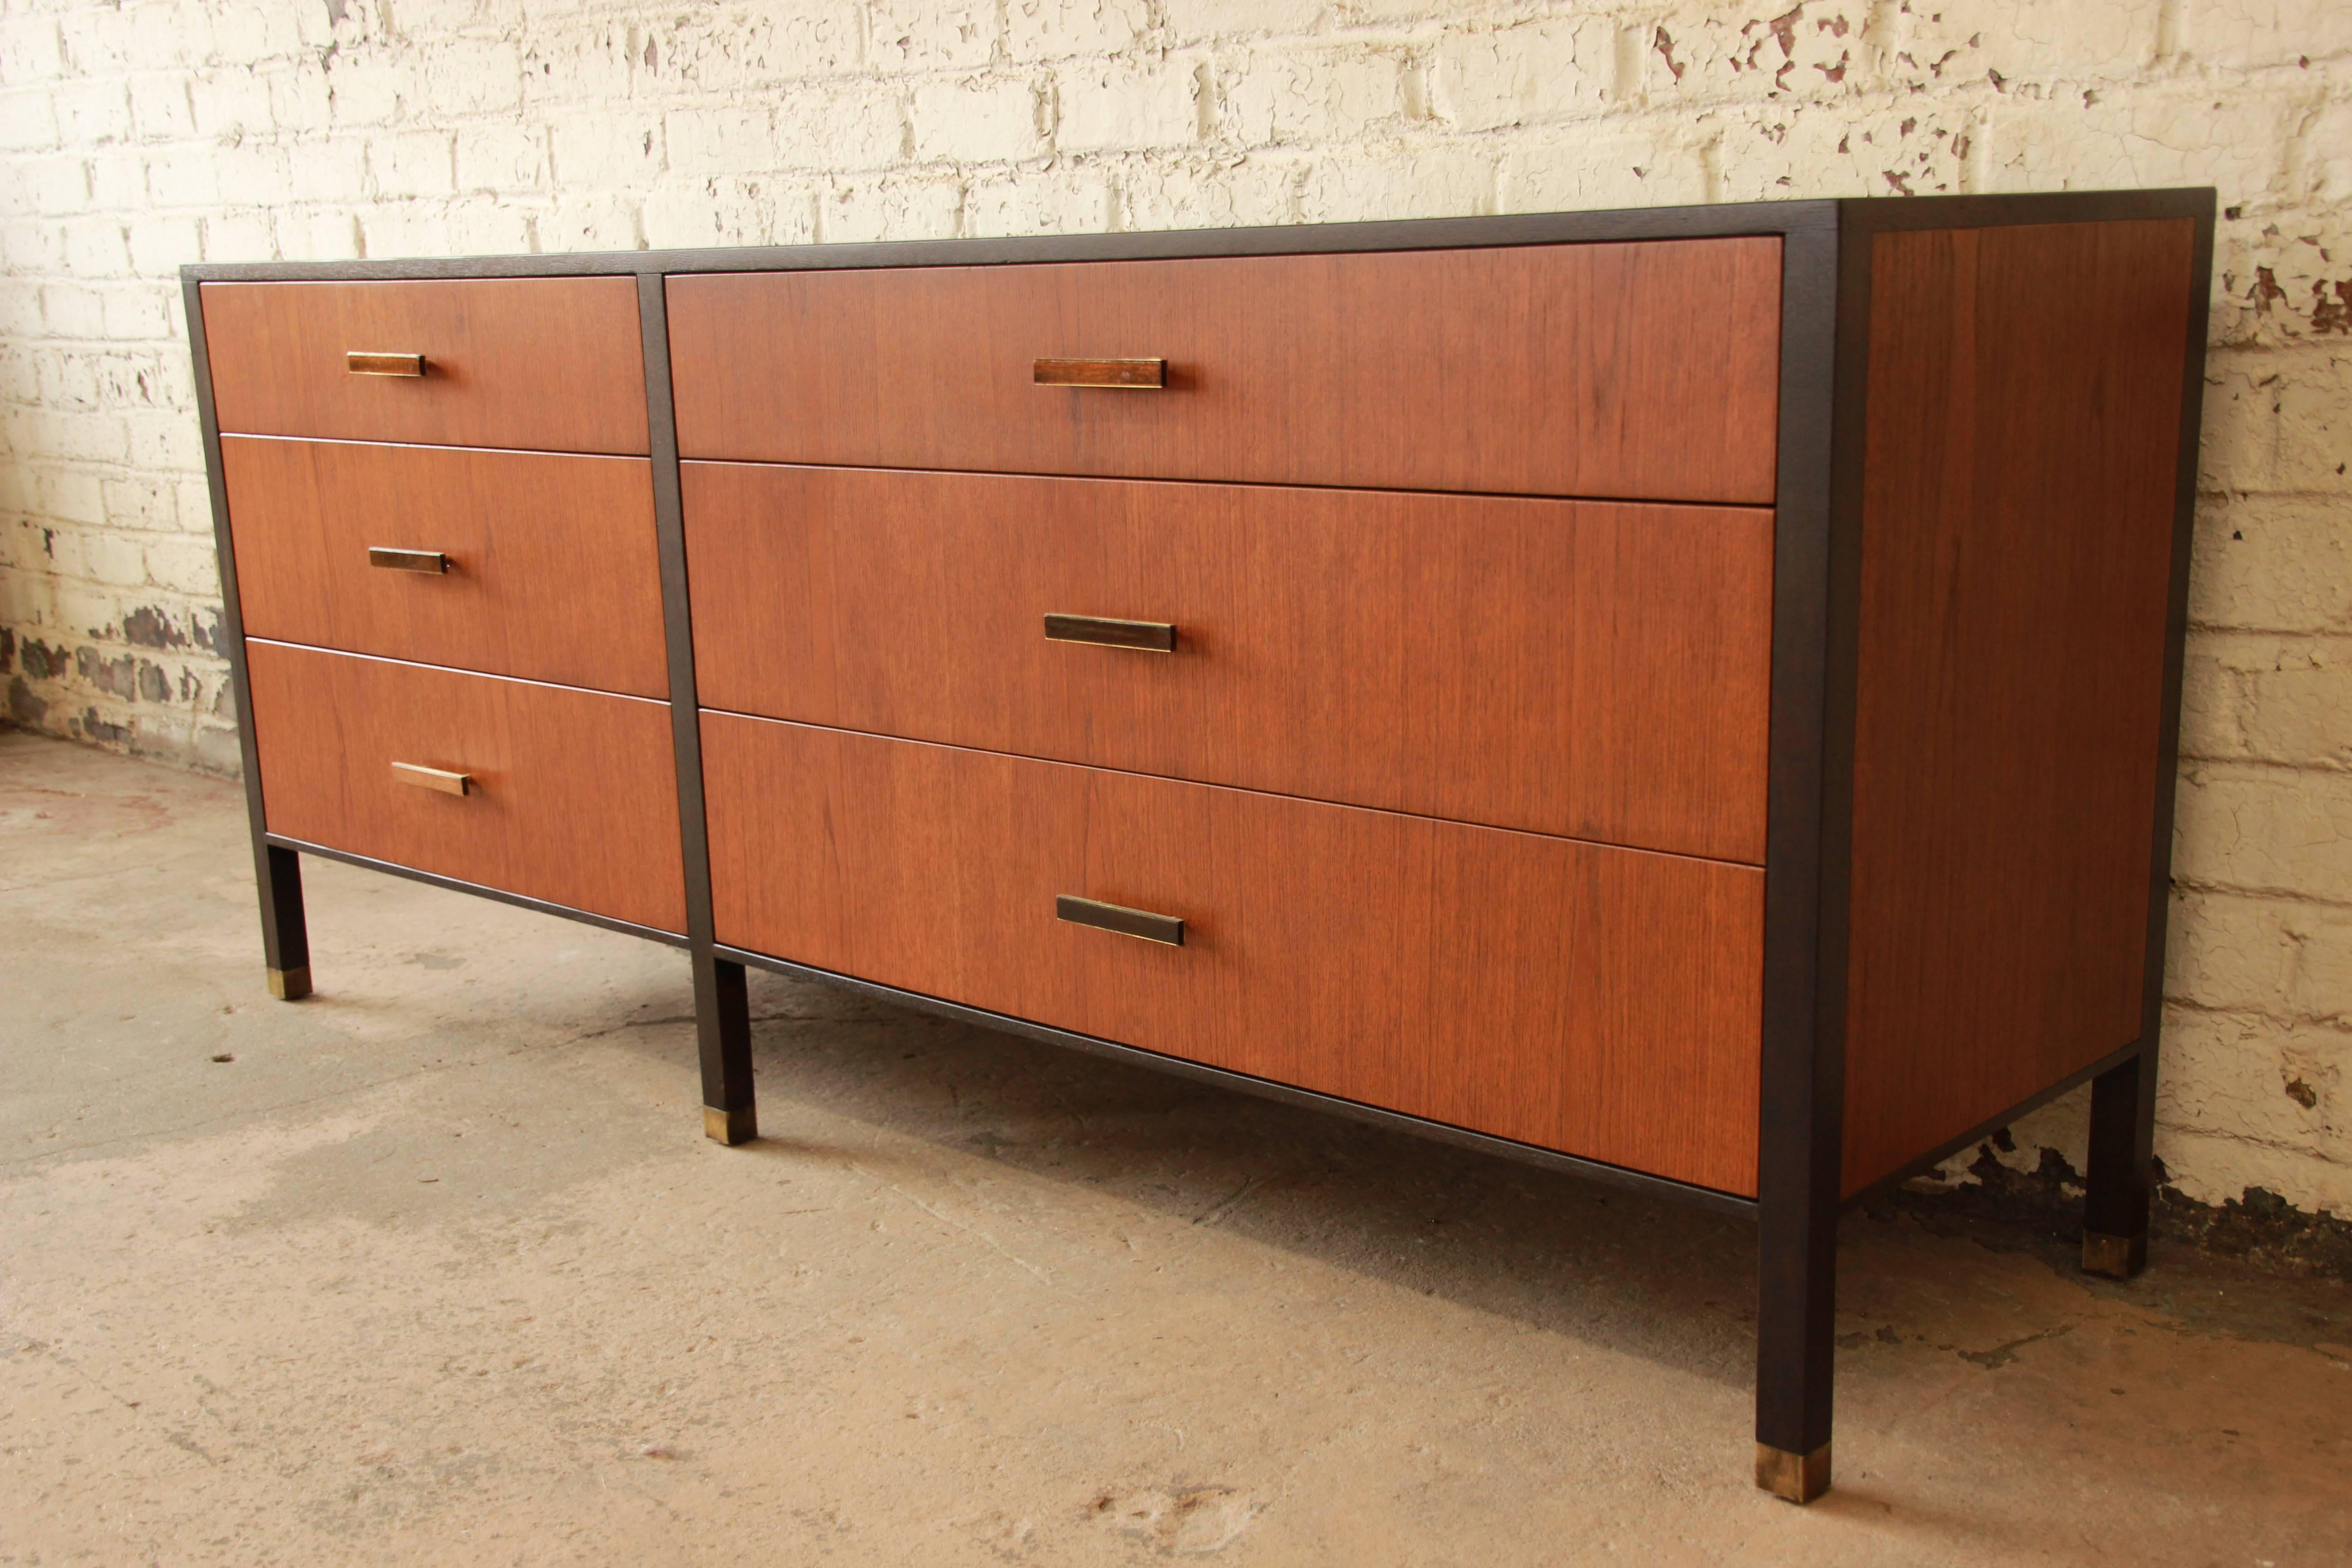 Offering an exceptional Mid-Century Modern six-drawer dresser or credenza designed by Harvey Probber. The dresser features beautiful walnut wood grain, with ebonized mahogany trim. It has brass tipped feet, as well as original brass and walnut